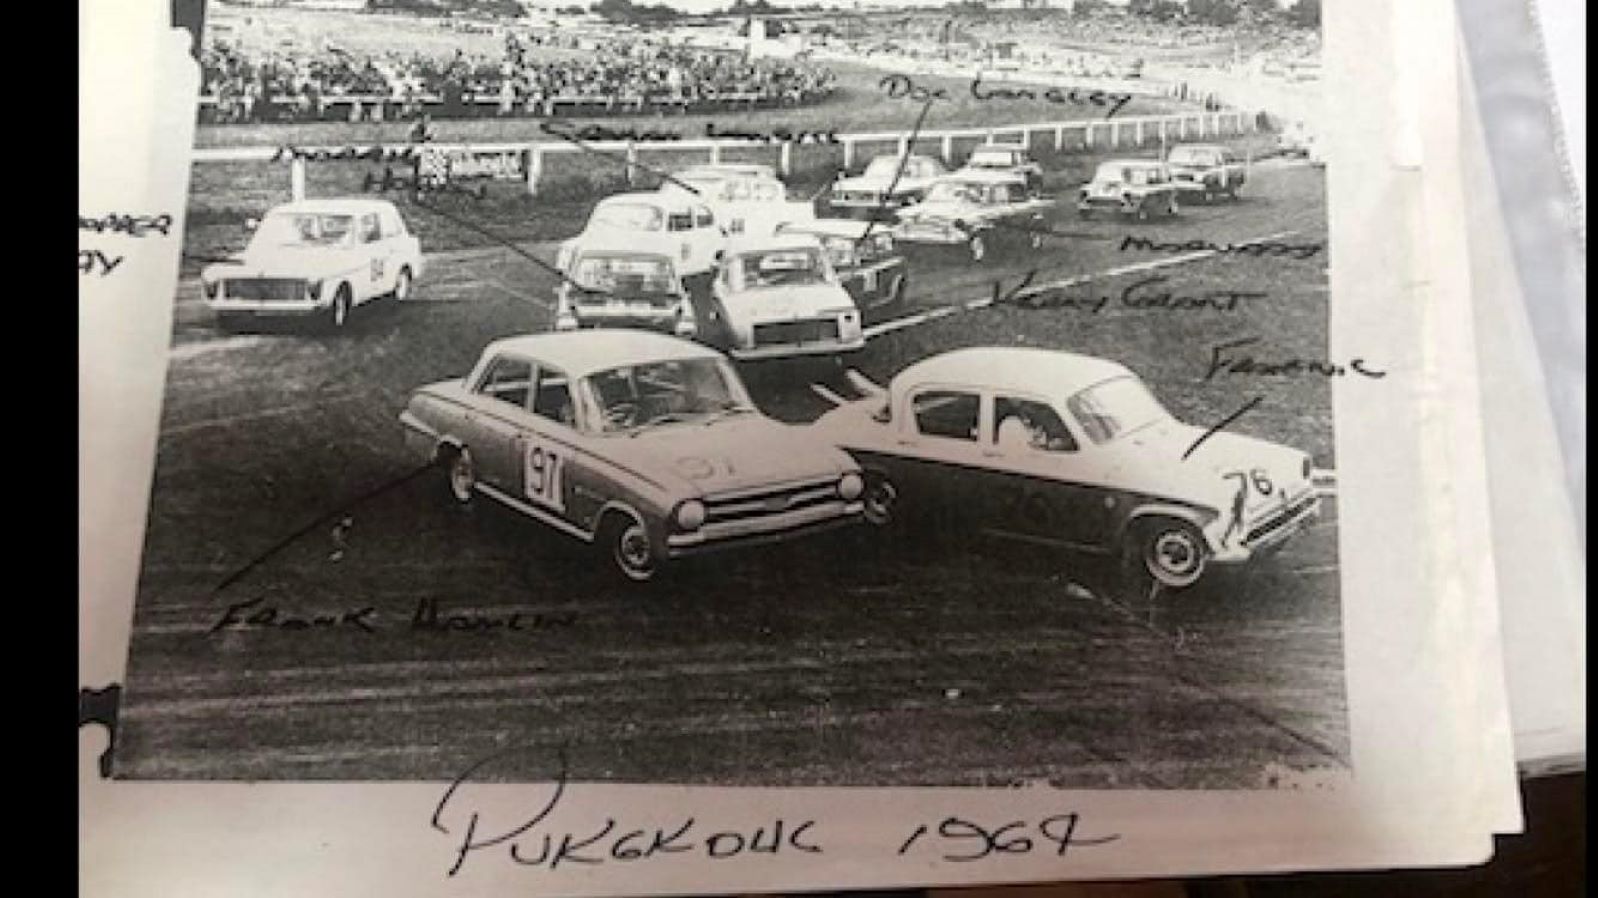 Name:  Pukekohe 1964 #022 1964 Saloon Car field at the Elbow - GP meeting Q 172 kb arch HVRA Bruce Dyer.jpg
Views: 355
Size:  172.4 KB